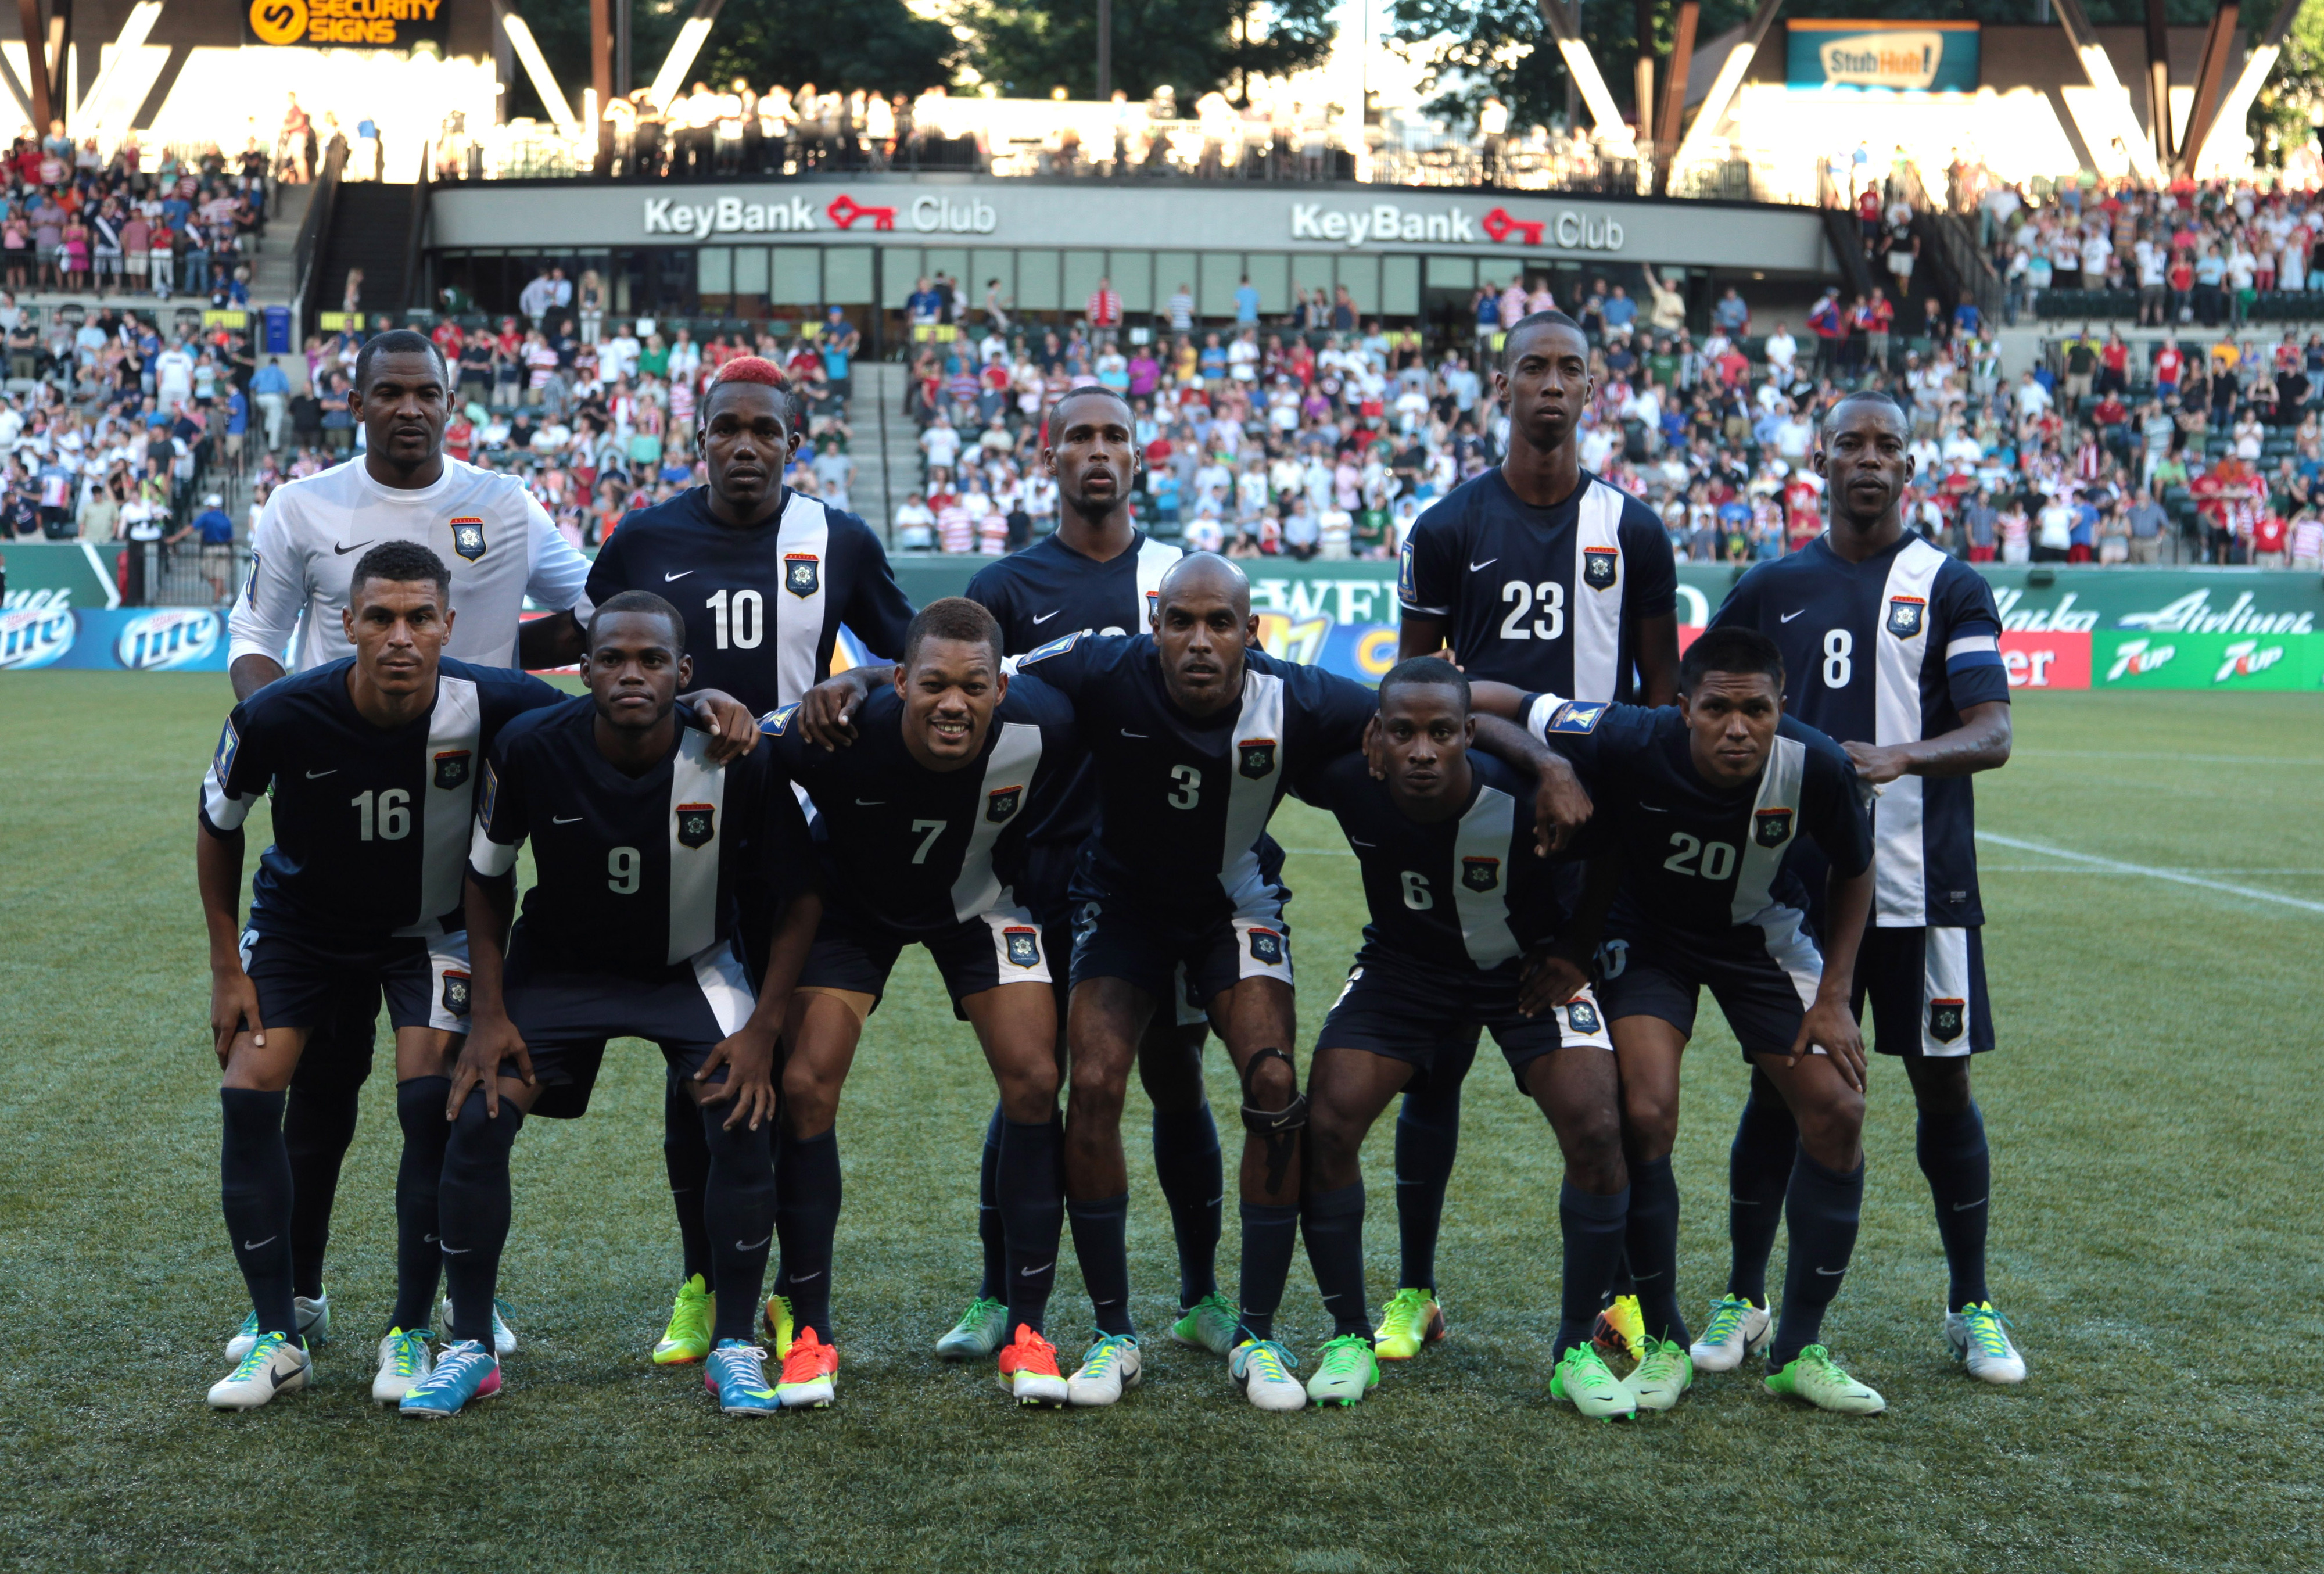 Ian Gaynair (#7), one of three Belize players that were offered cash to fix their match against the USA.